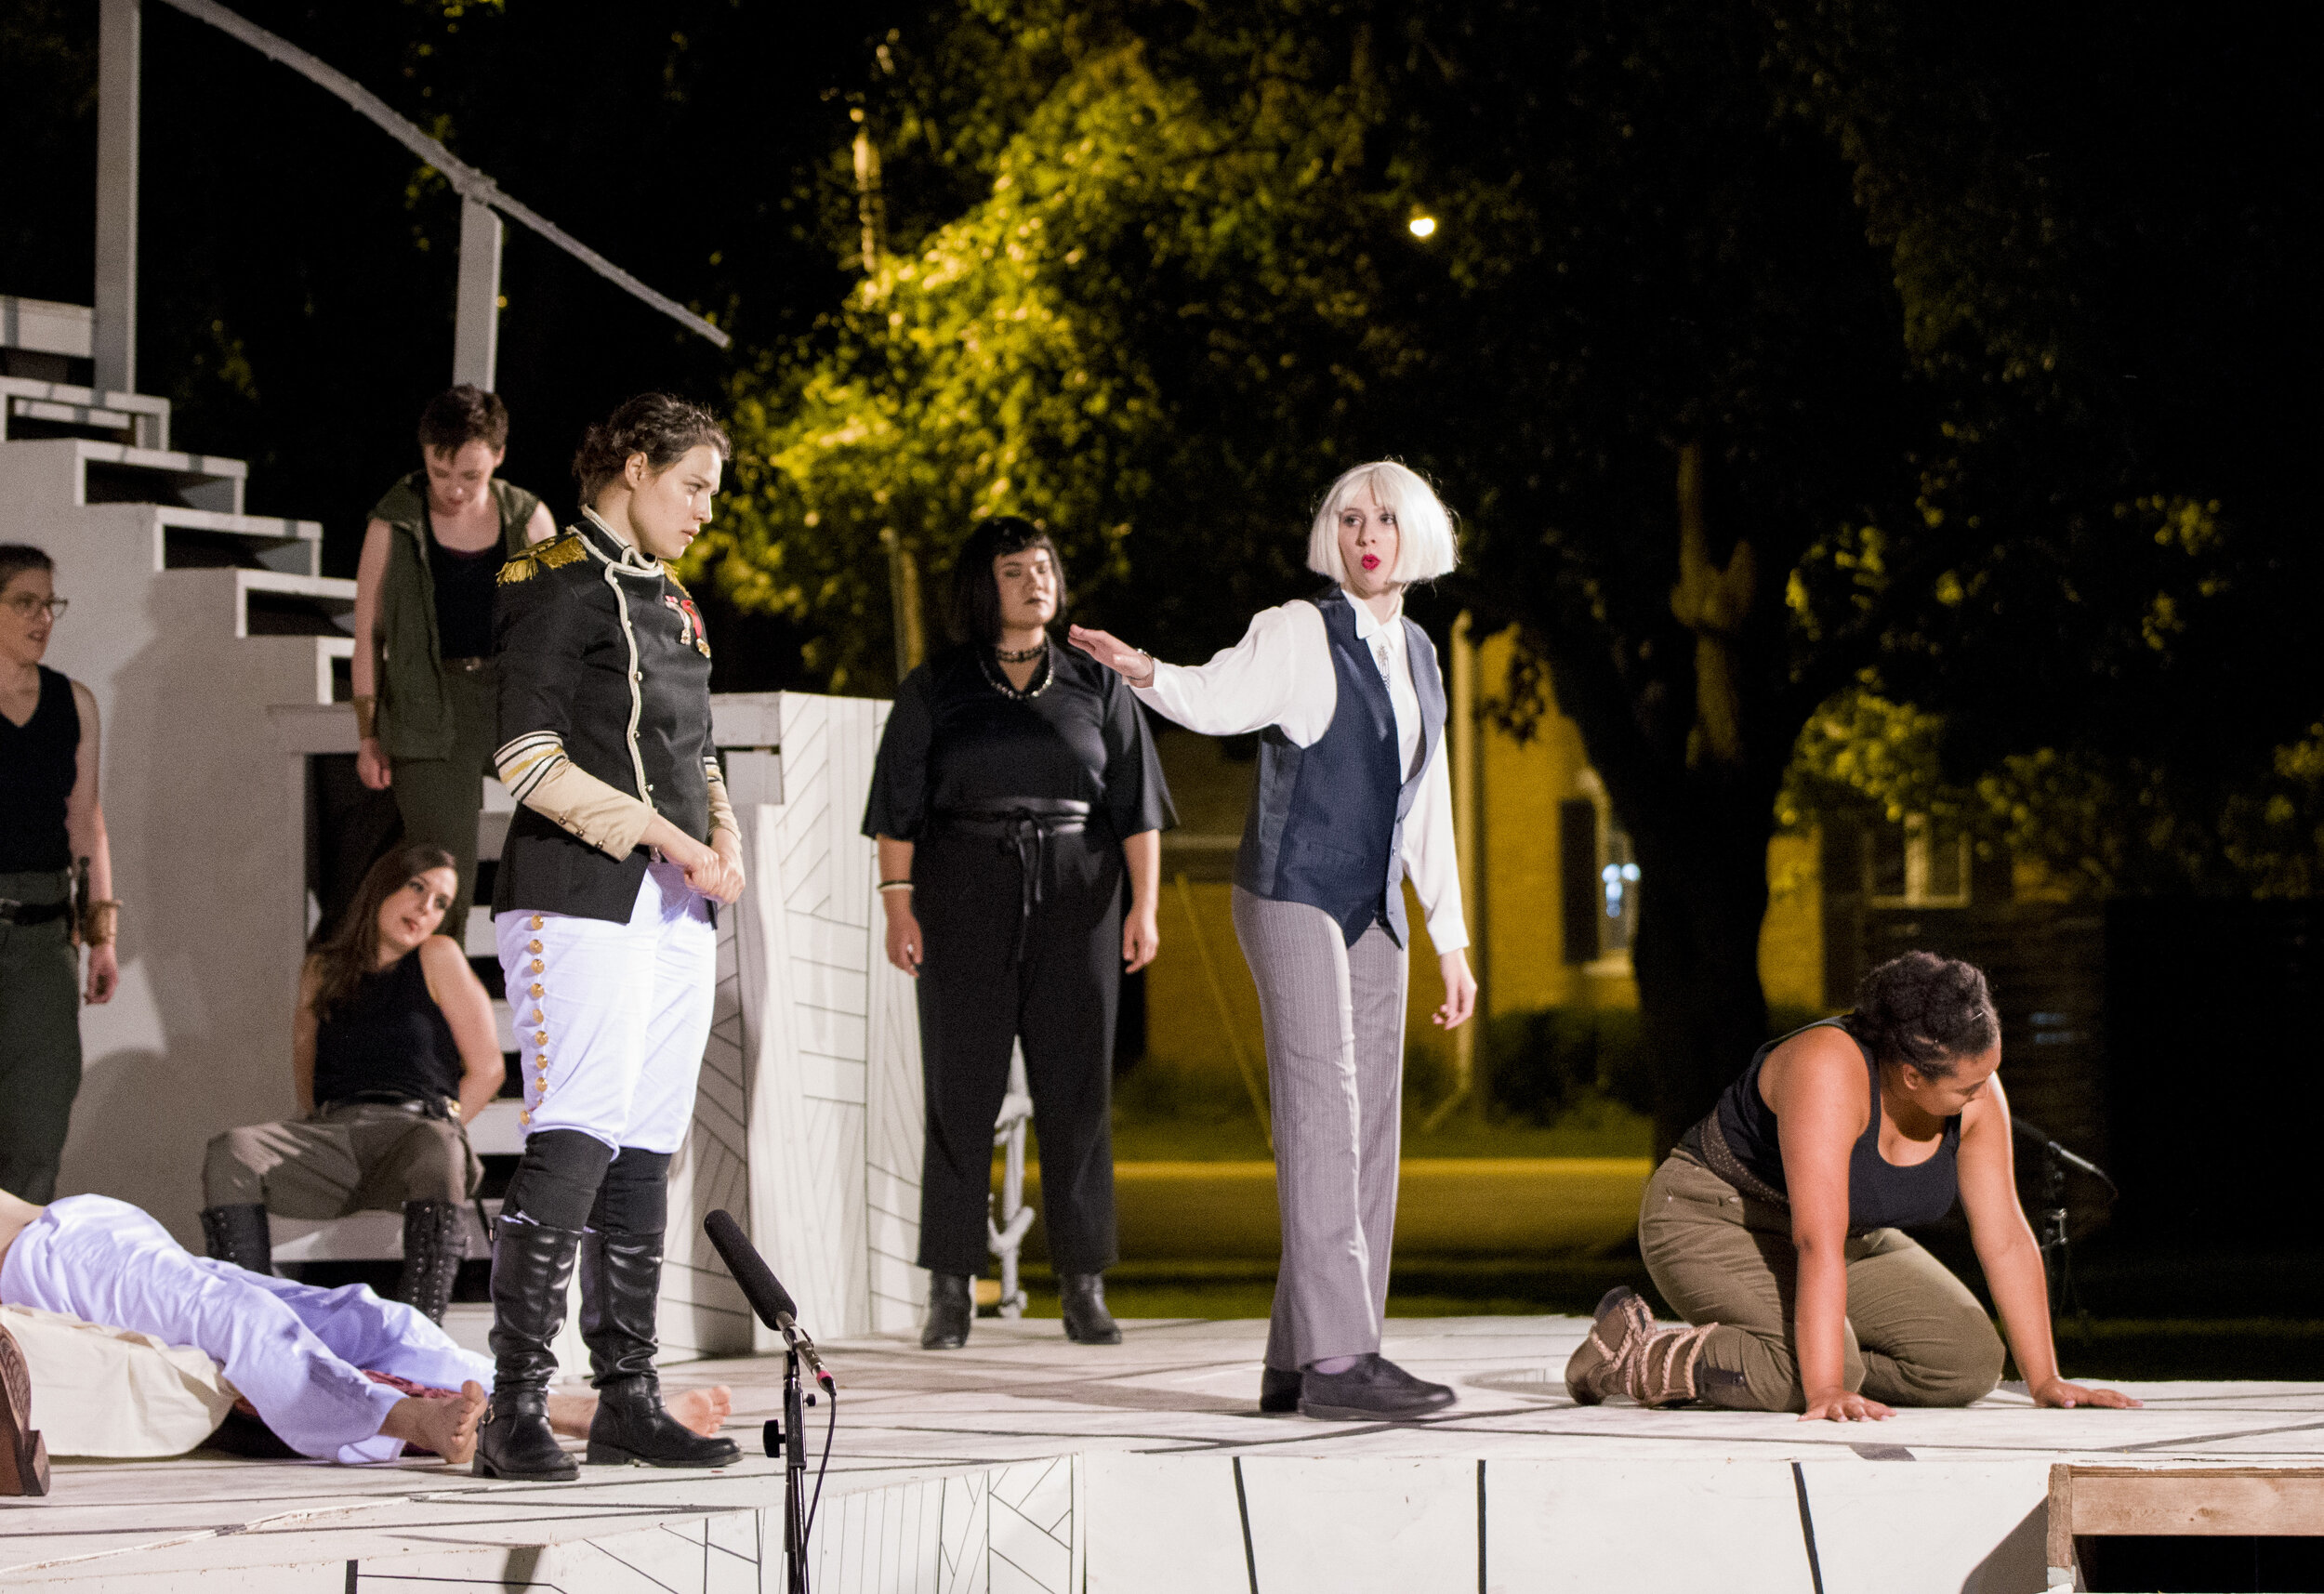  Othello performed by the Princeton Theater Group’s Shakespeare in the Park 